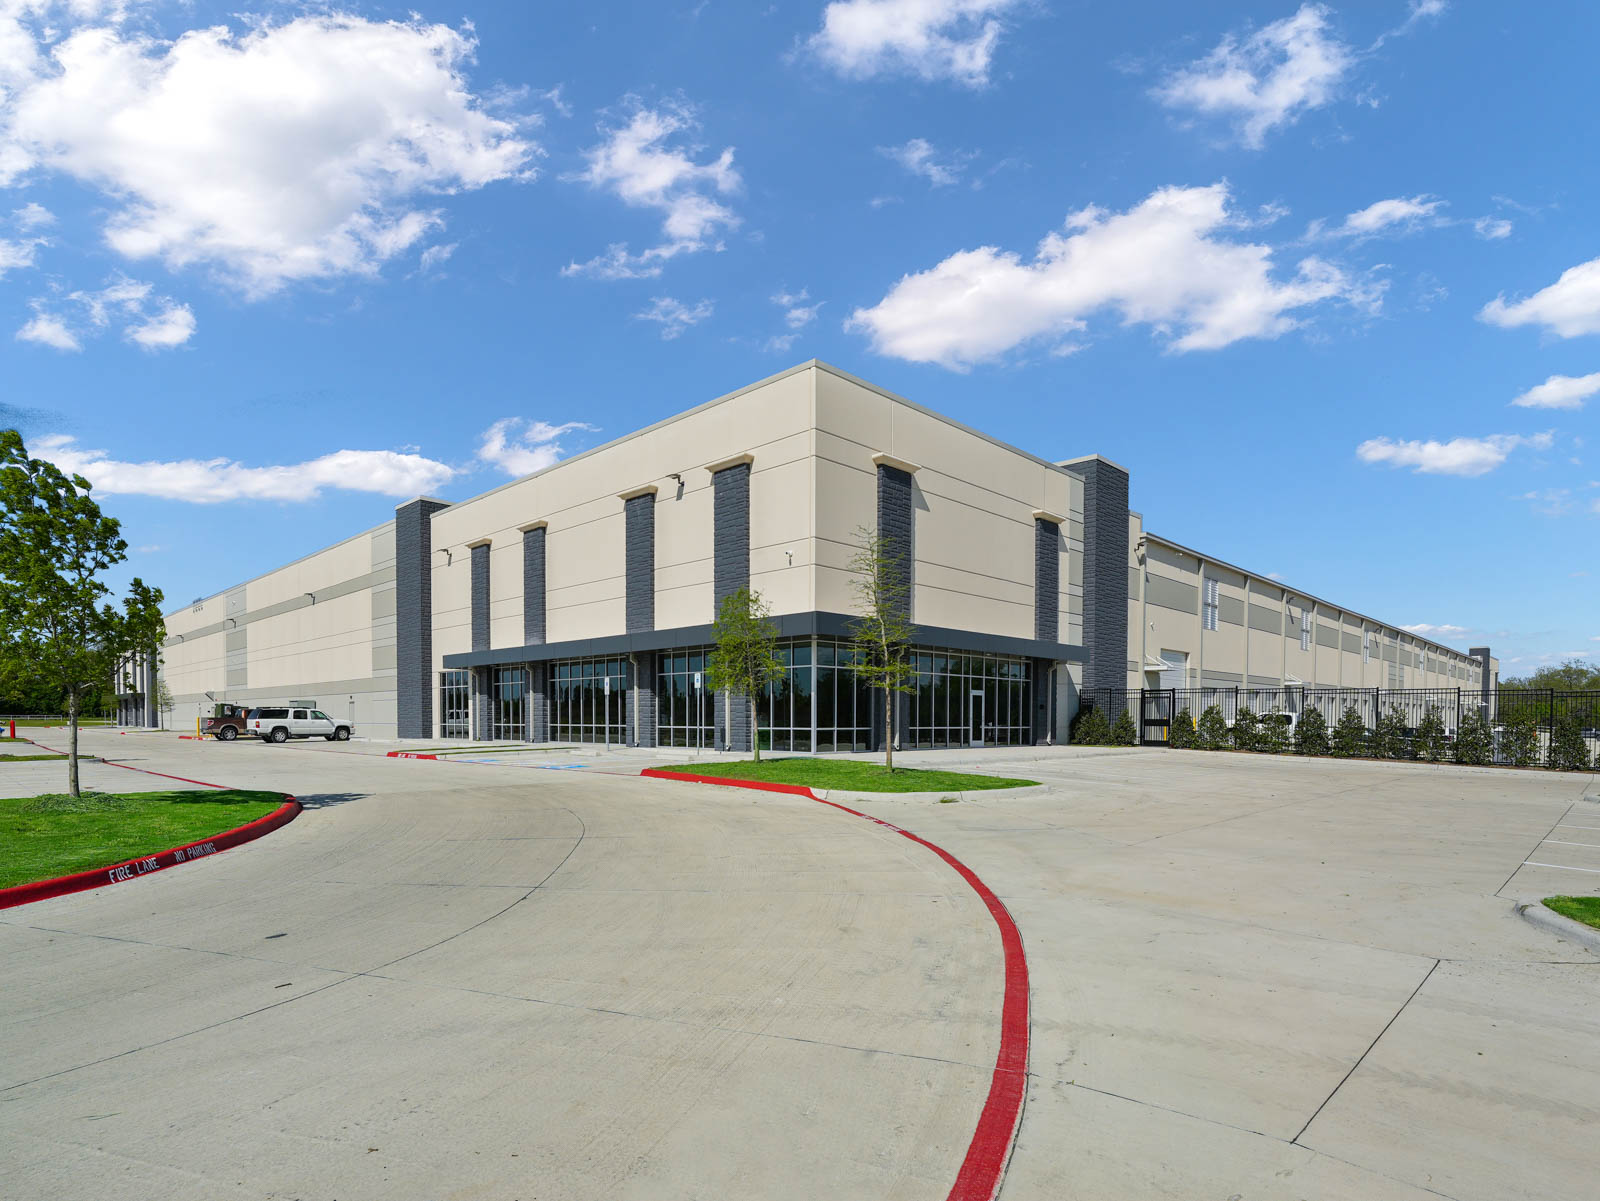 Cadence McShane Construction Company Completes the McKinney Logistics Center – Building C for Core5 Industrial Partners